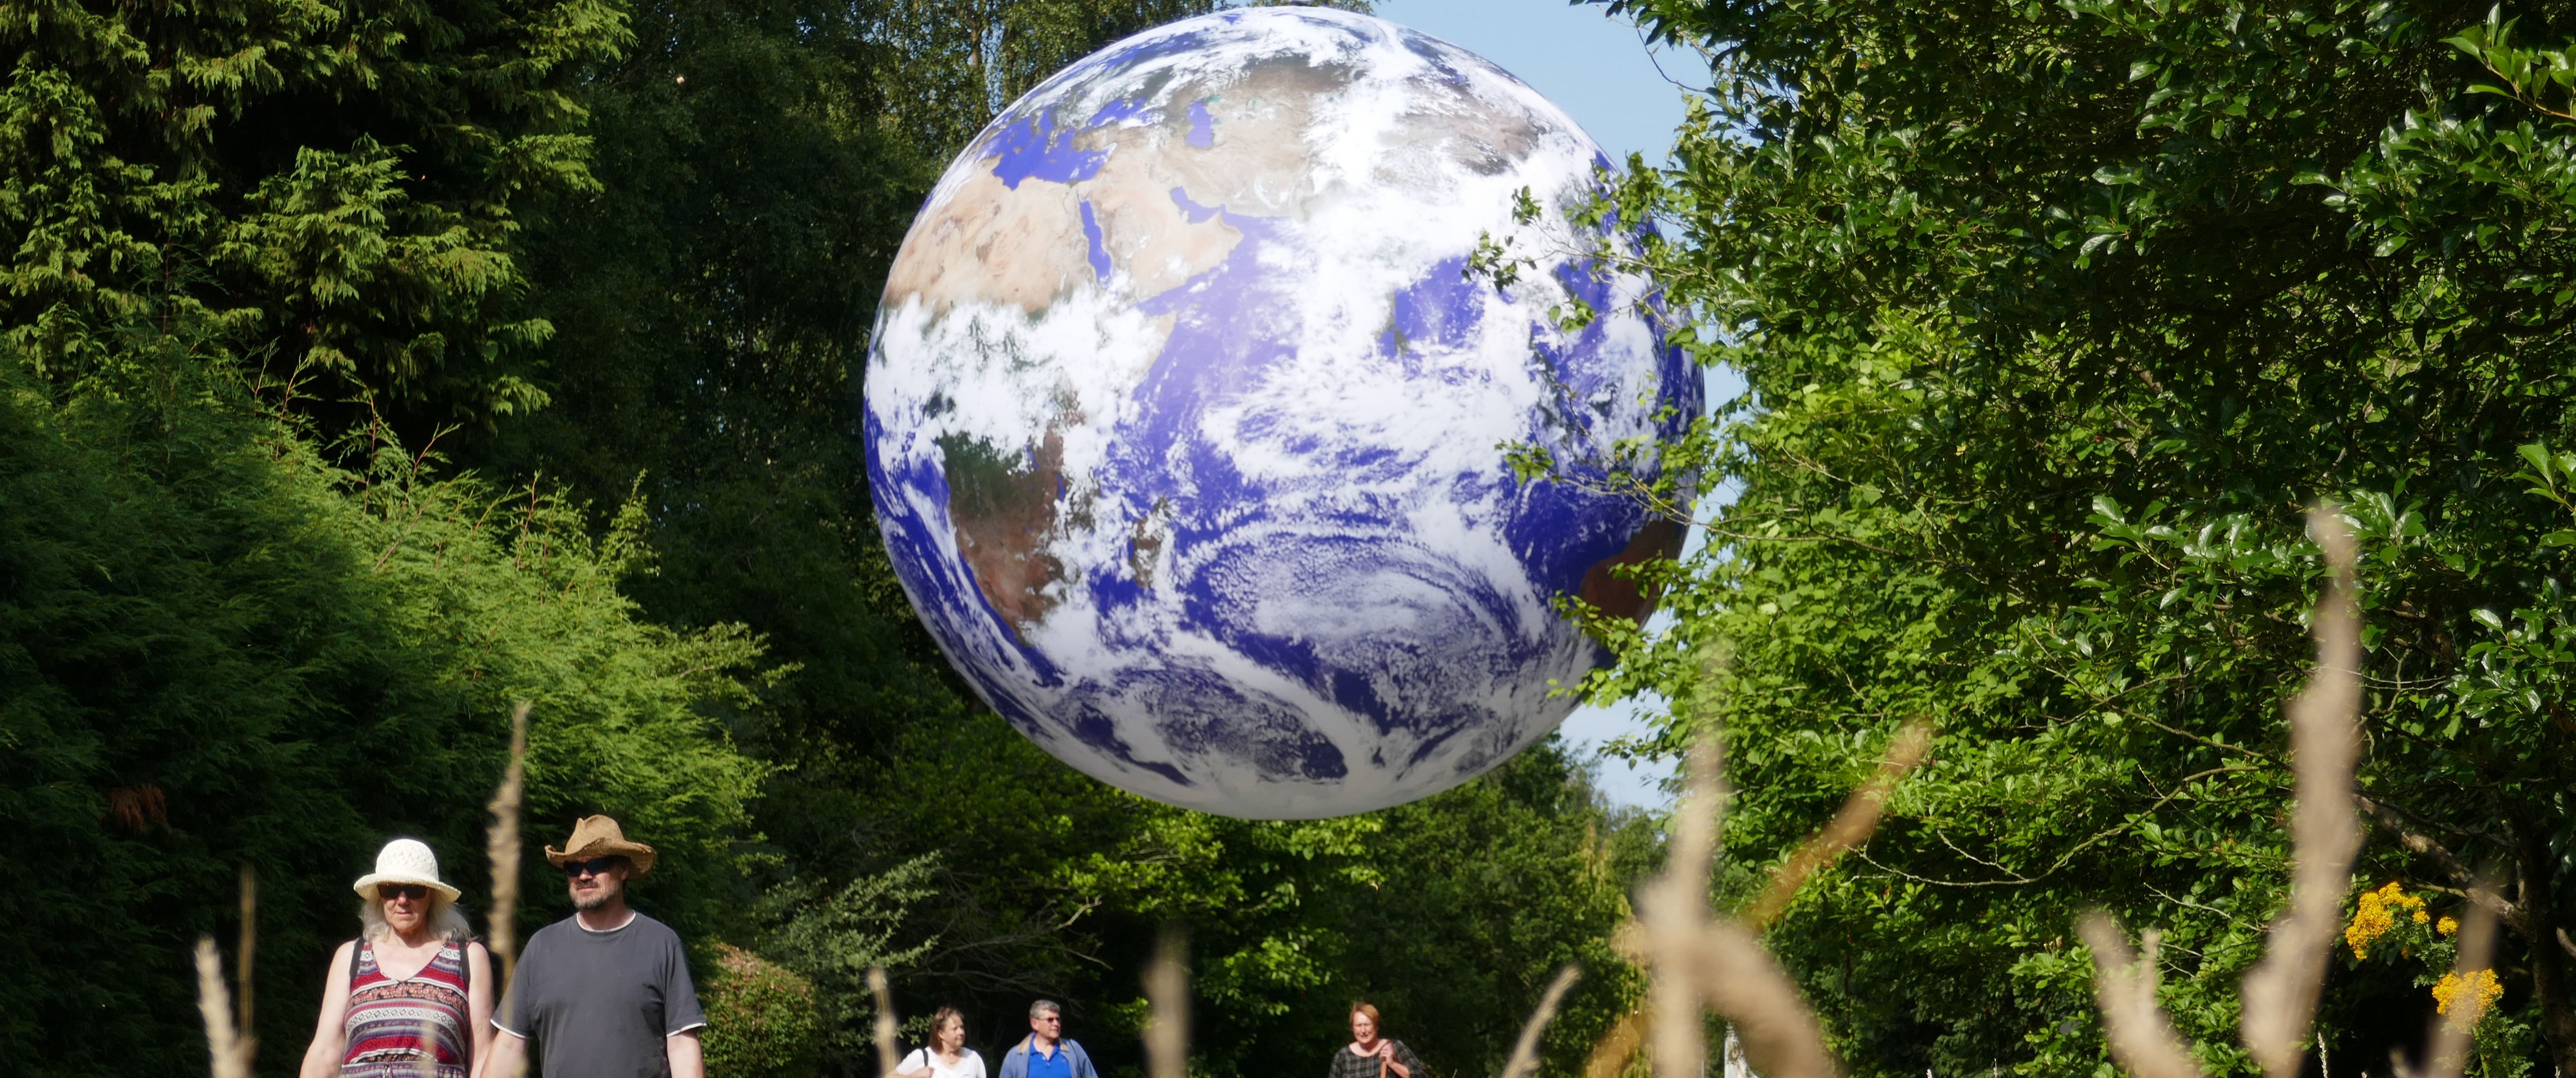 Moors Valley Country Park and Forest stages Gaia as part of Inside Out Dorset’s international arts festival, 17 – 19 September 2021